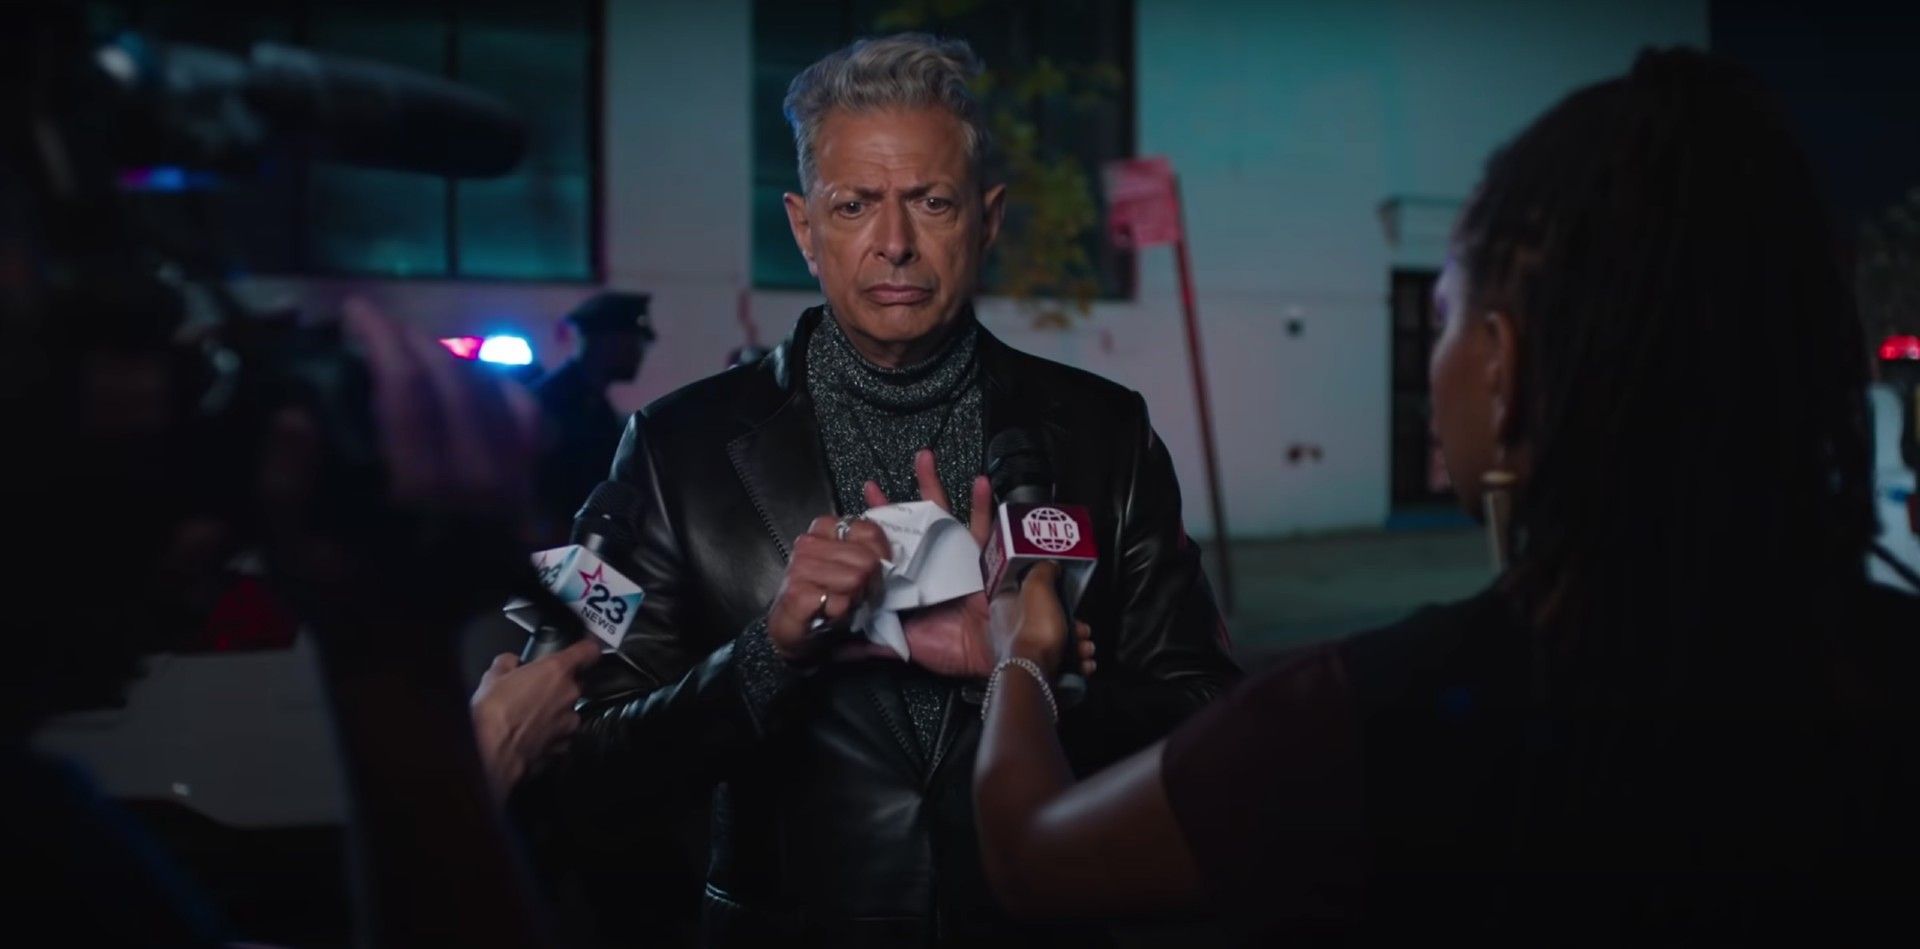 Jeff Goldblum in Search Party playing Tunnel Quinn